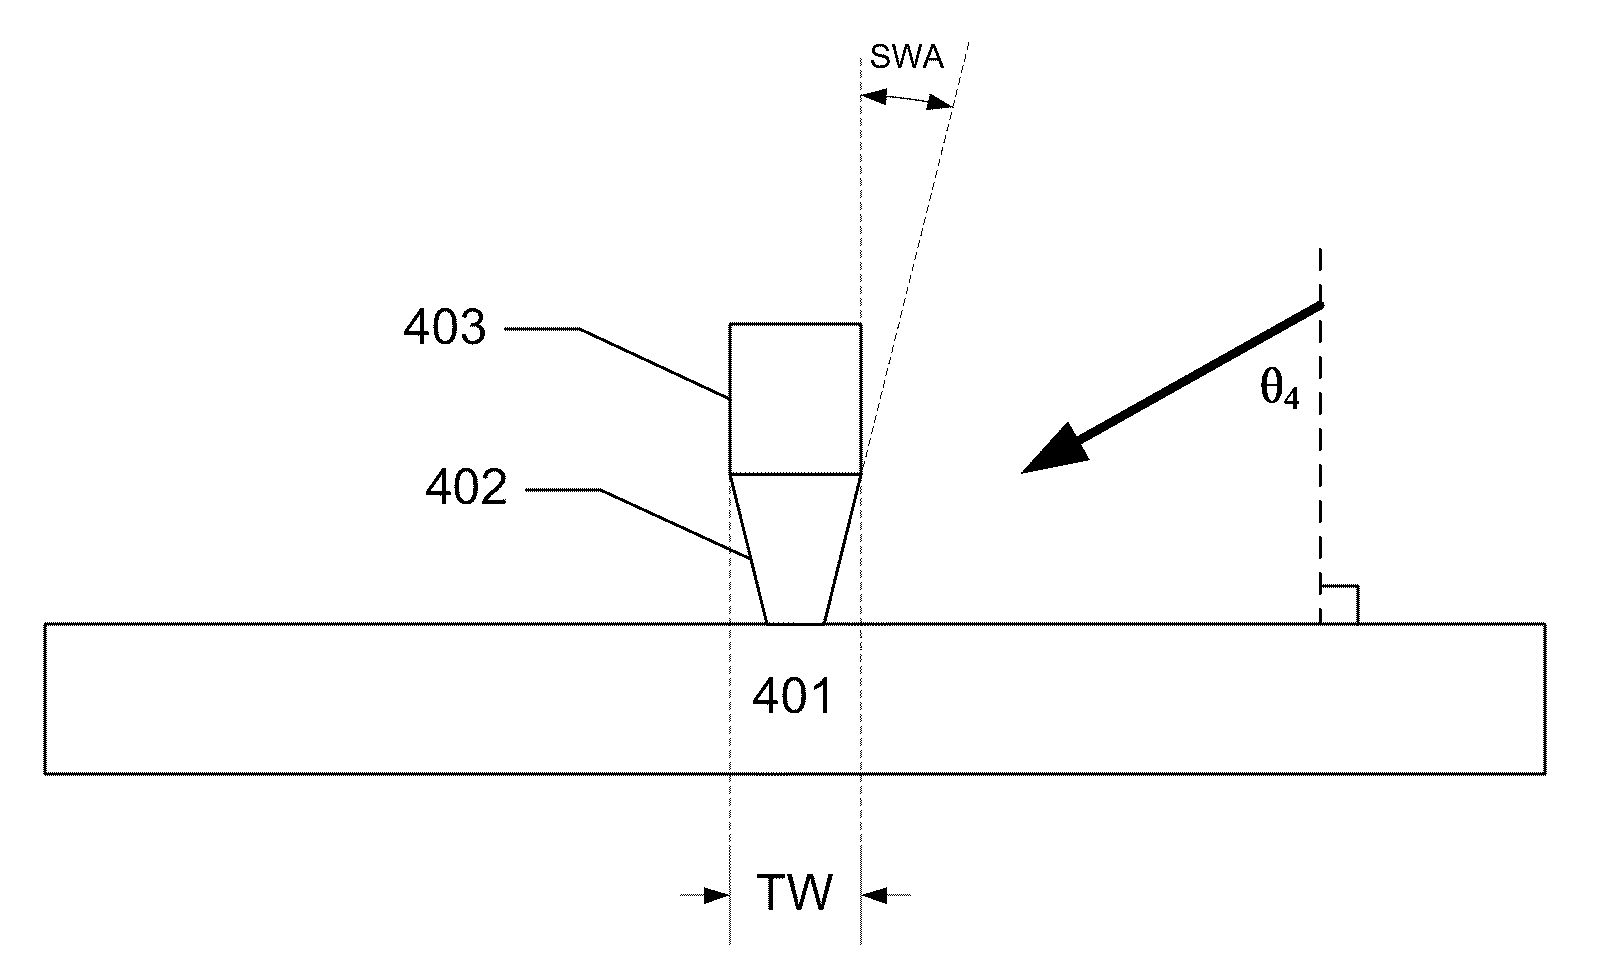 Tunable pole trim processes for fabricating trapezoidal perpendicular magnetic recording (PMR) write poles